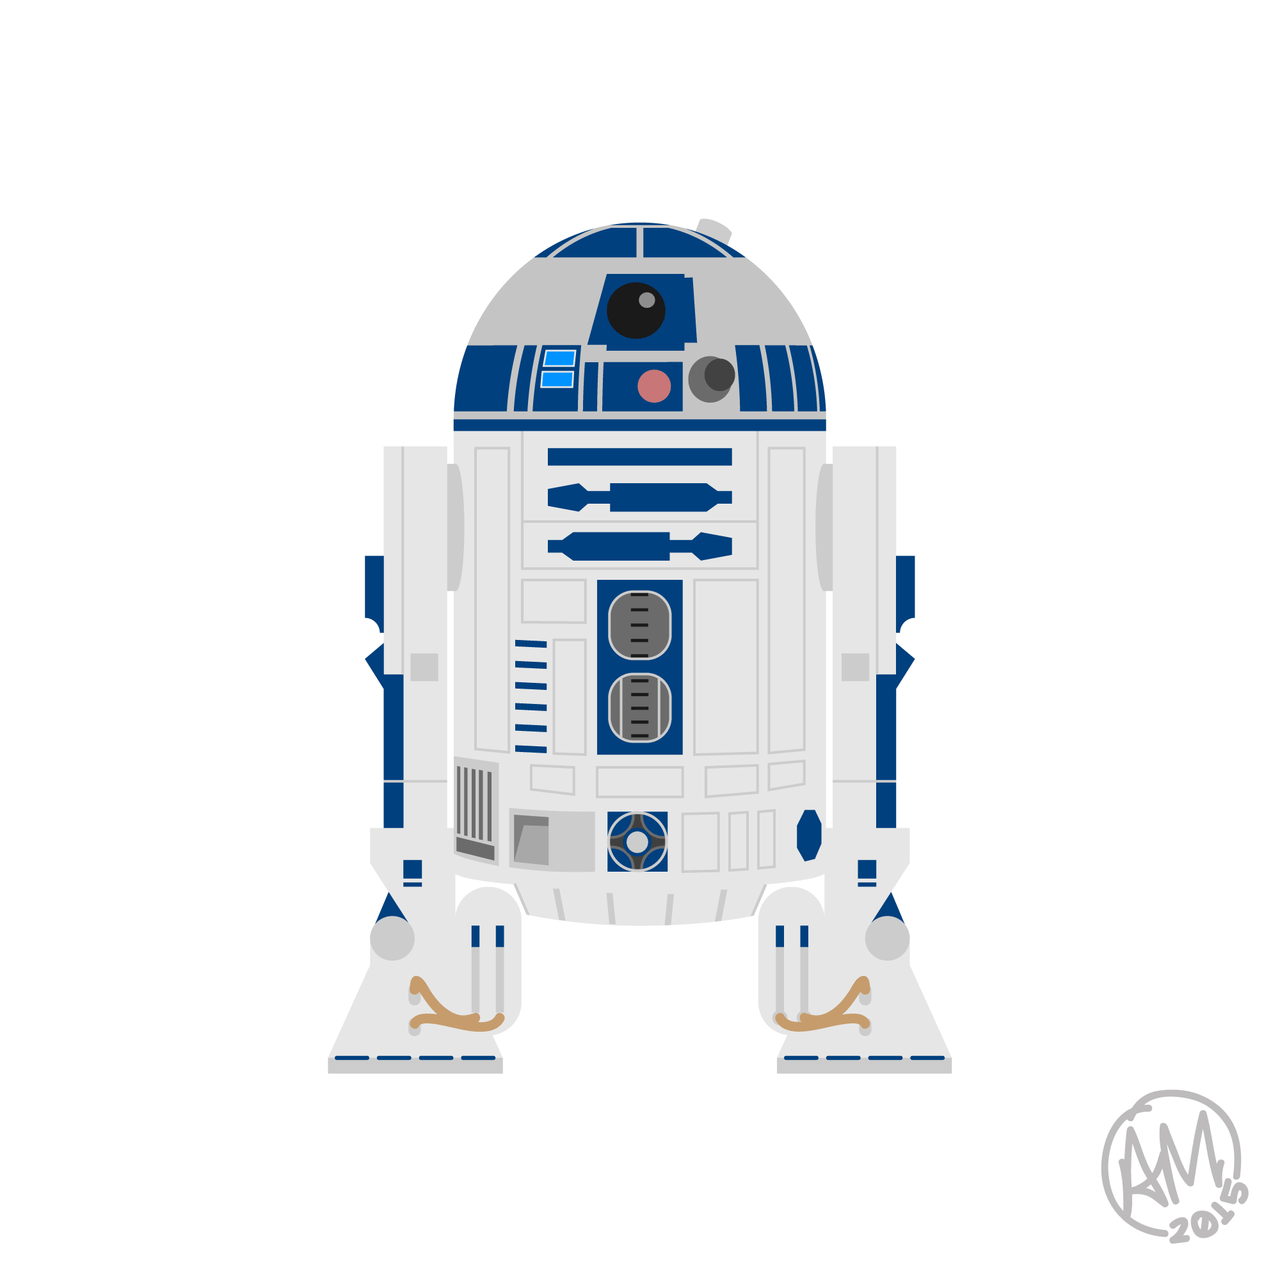 90+ R2d2 Wallpapers.